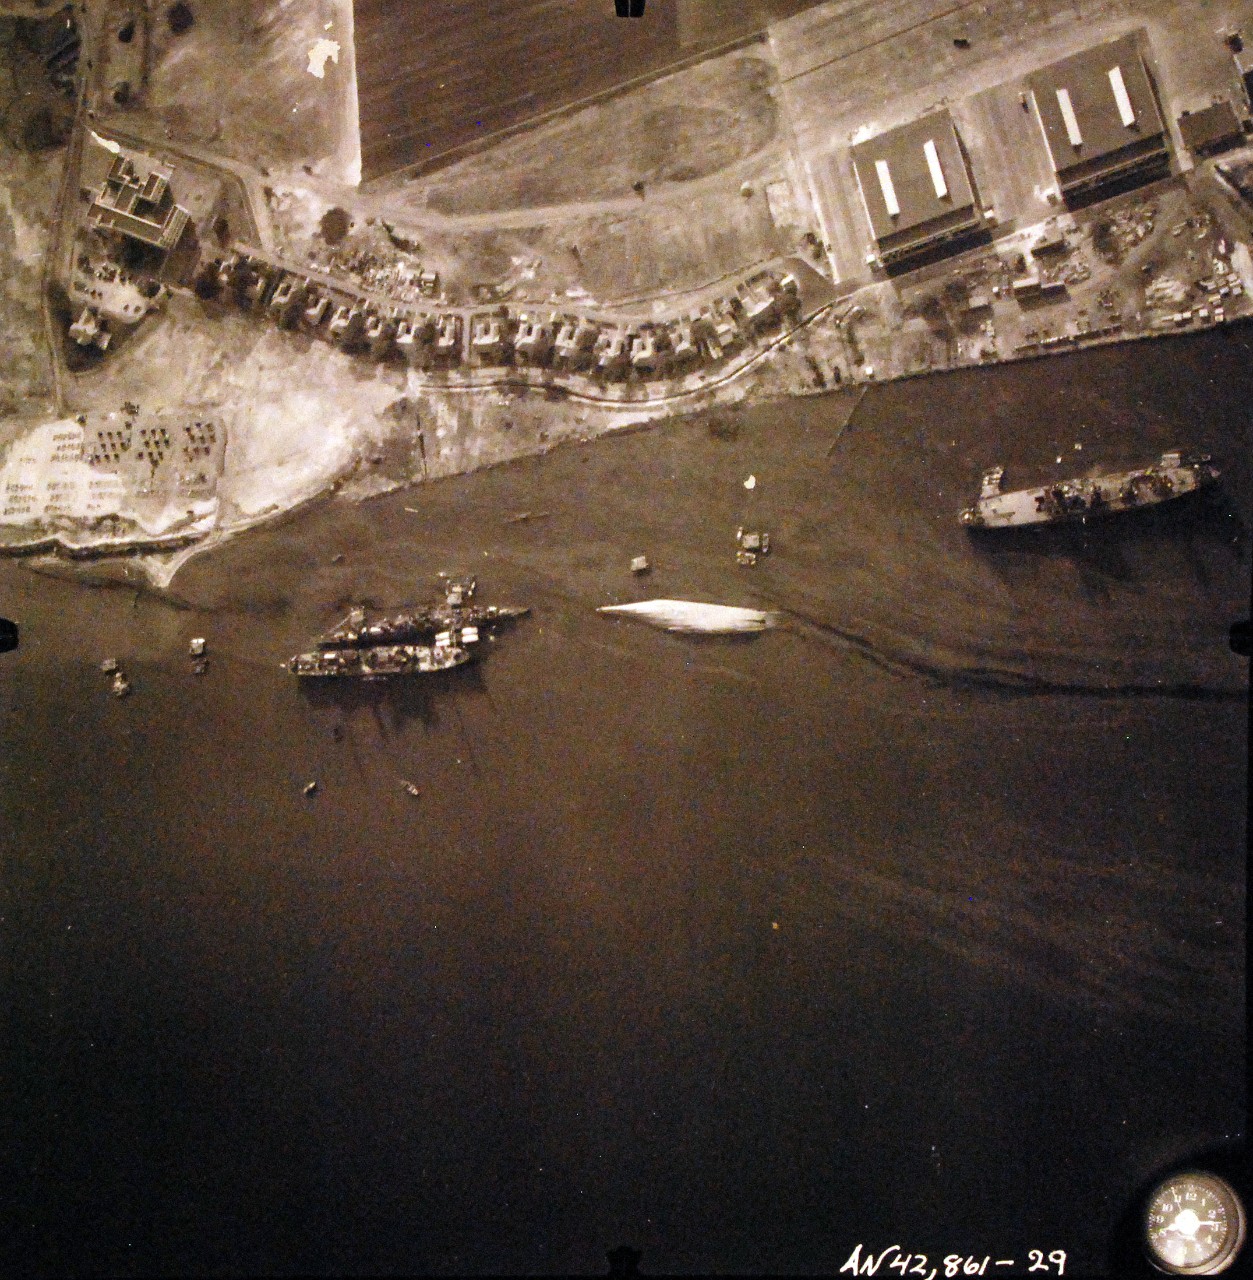 80-G-387590:  Pearl Harbor Attack, 7 December 1941.  Aerial view of "Battleship Row" moorings on the southern side of Ford Island, 10 December 1941, showing damage from the Japanese raid three days earlier.  Shown are USS Raleigh (CL 7), sunk, and USS Utah (BB 31), capsized.  Note dark oil streaks on the harbor surface, originating from the sunken battleships. Photographed by VJ-1 at an altitude of 3,000 feet and released November 9, 1950. U.S. Navy photograph, now in the collections of the National Archives.        (9/22/2015).